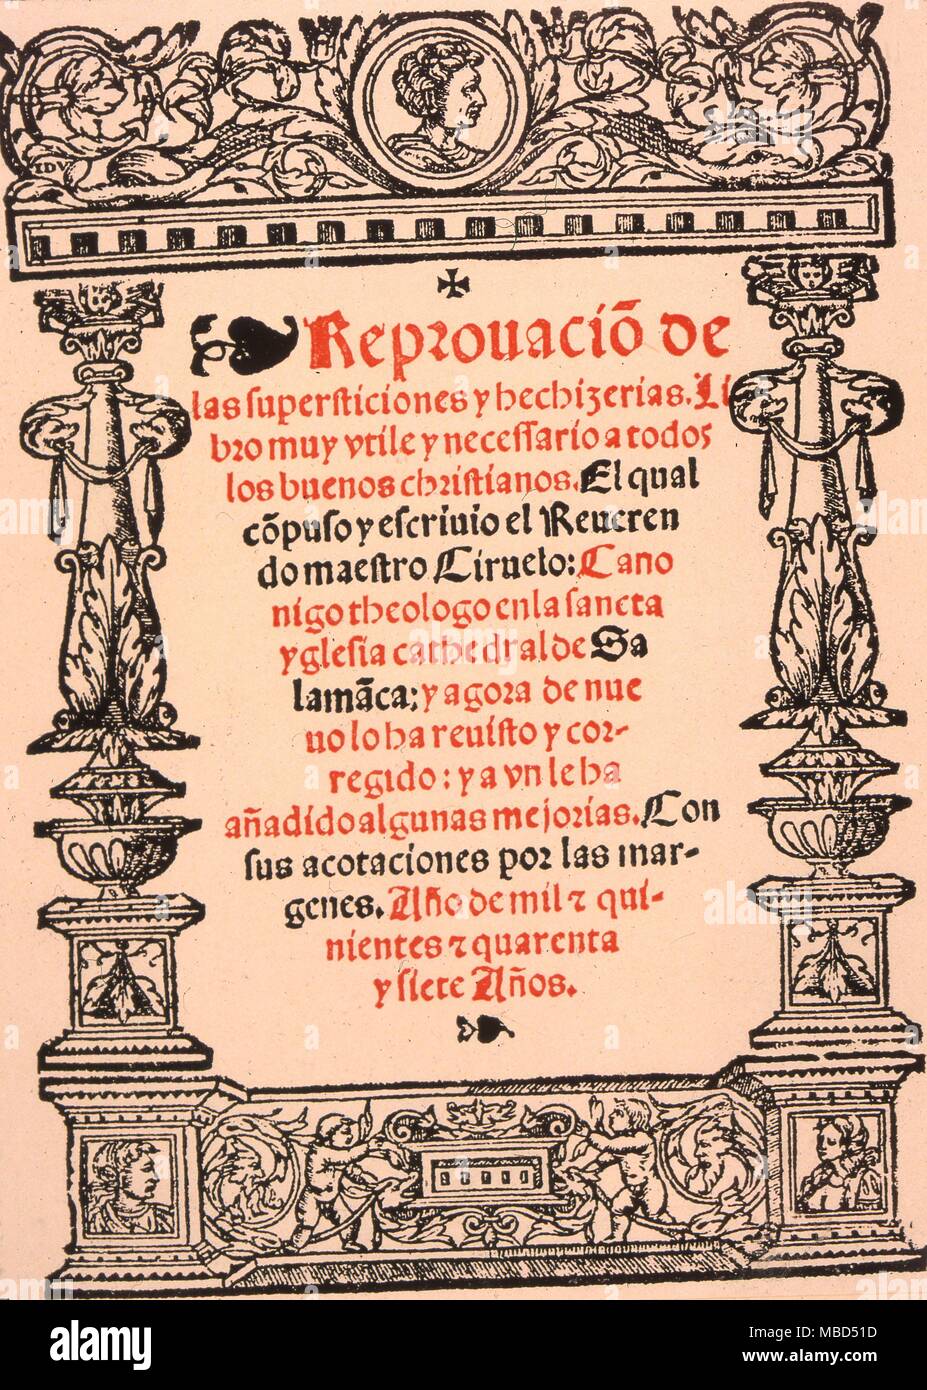 Herbal, book on superstitions and Heresy. Pedro Sanchez Ciruelo's 'Reprovacion de las supersticiones y hechizerias' of 1545. The text condemns the many black magic and occult practices of the day. Stock Photo